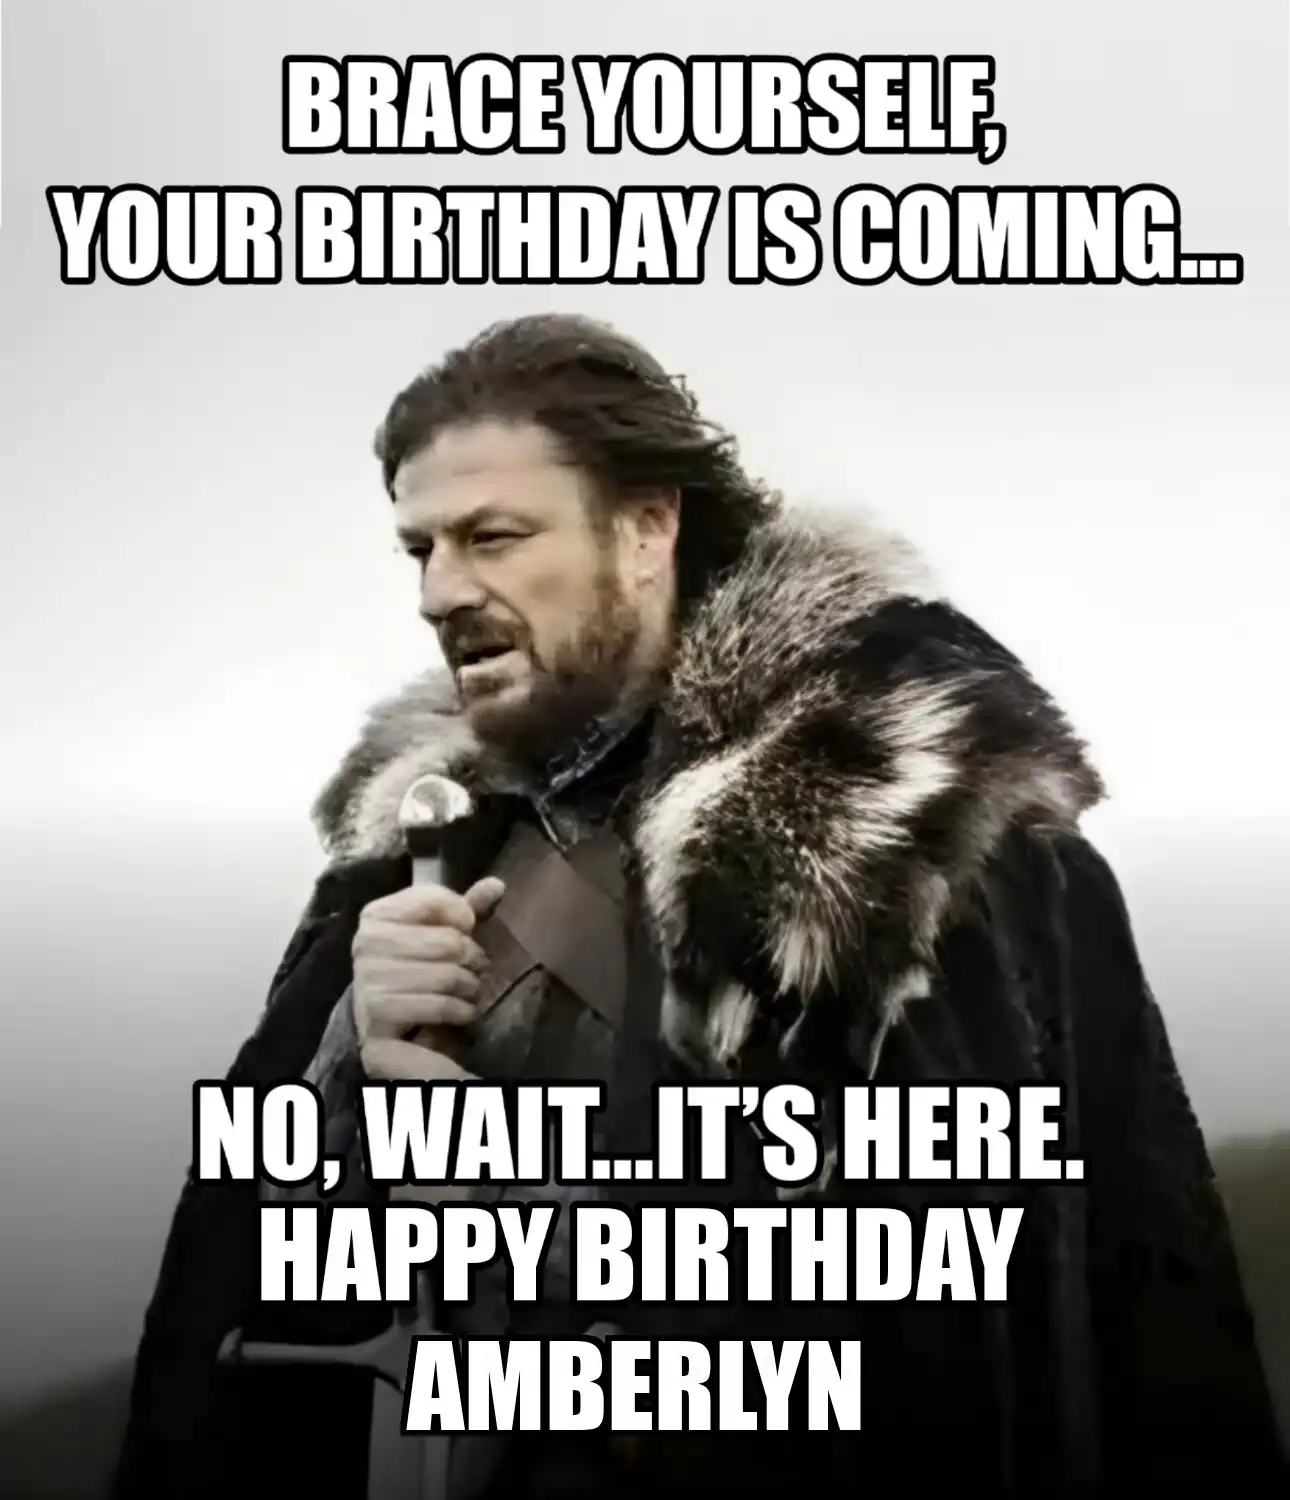 Happy Birthday Amberlyn Brace Yourself Your Birthday Is Coming Meme